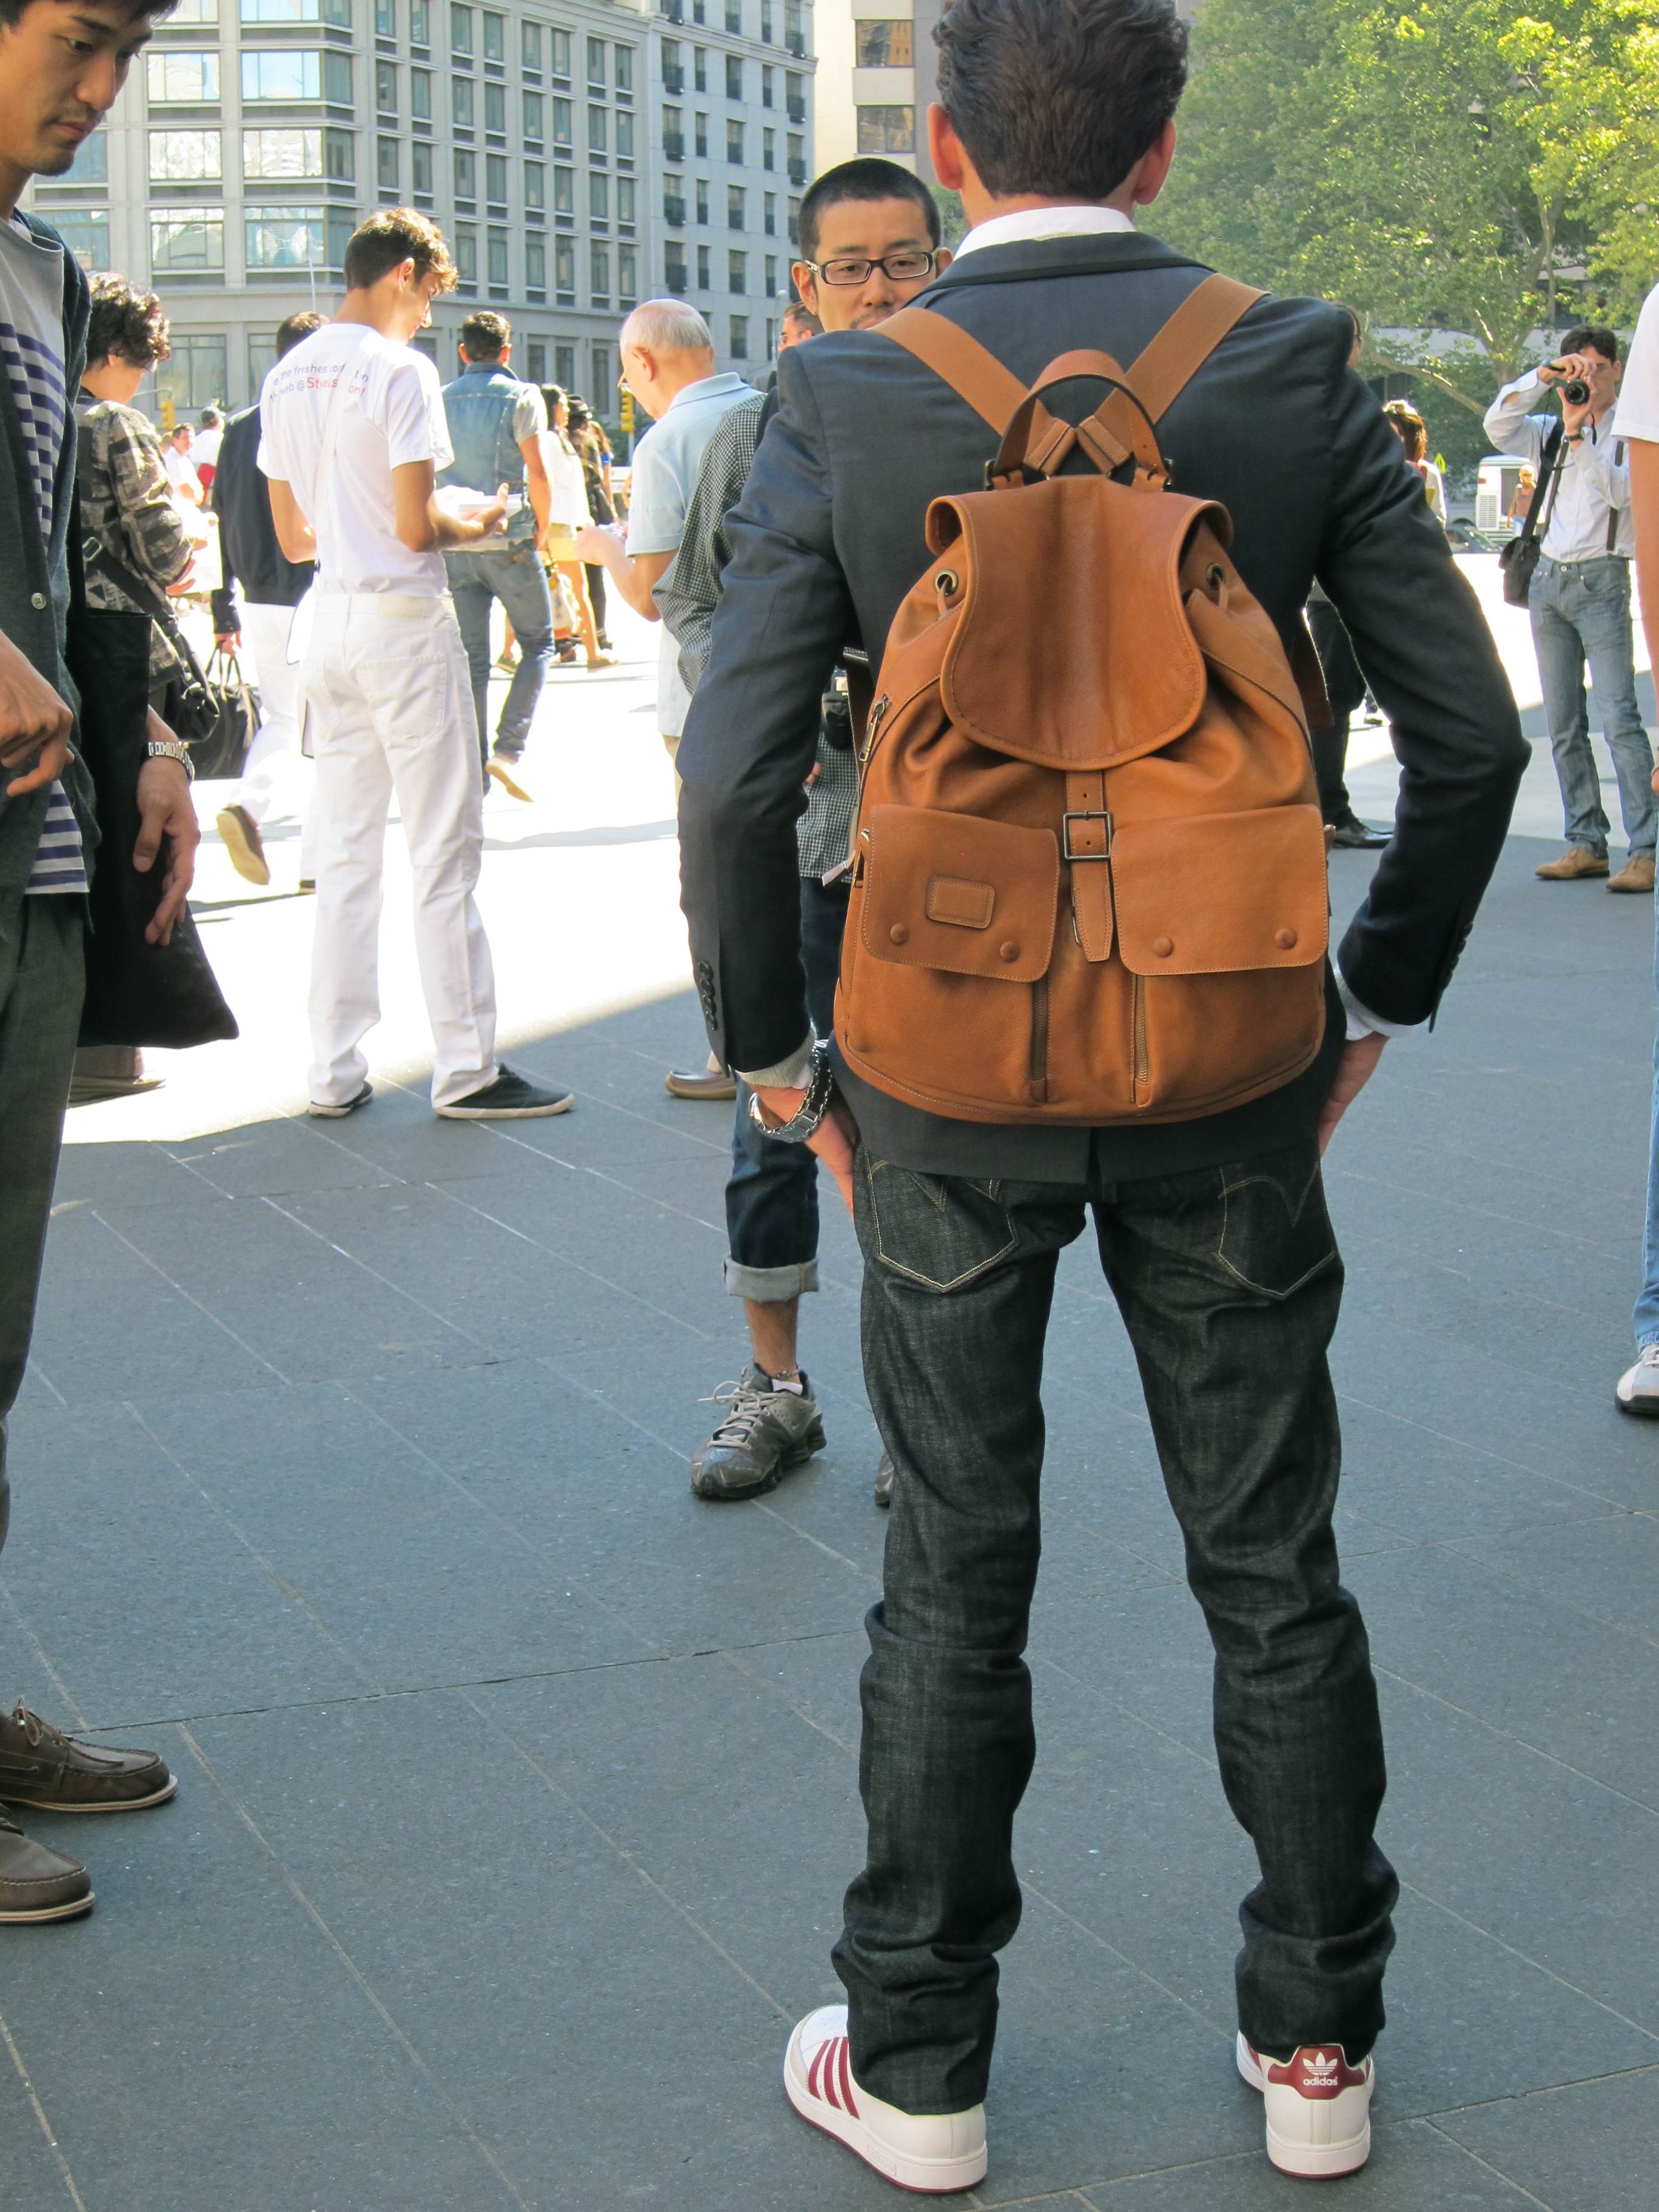 The Backpack is the Bag for Men | Fashionique by Dominique